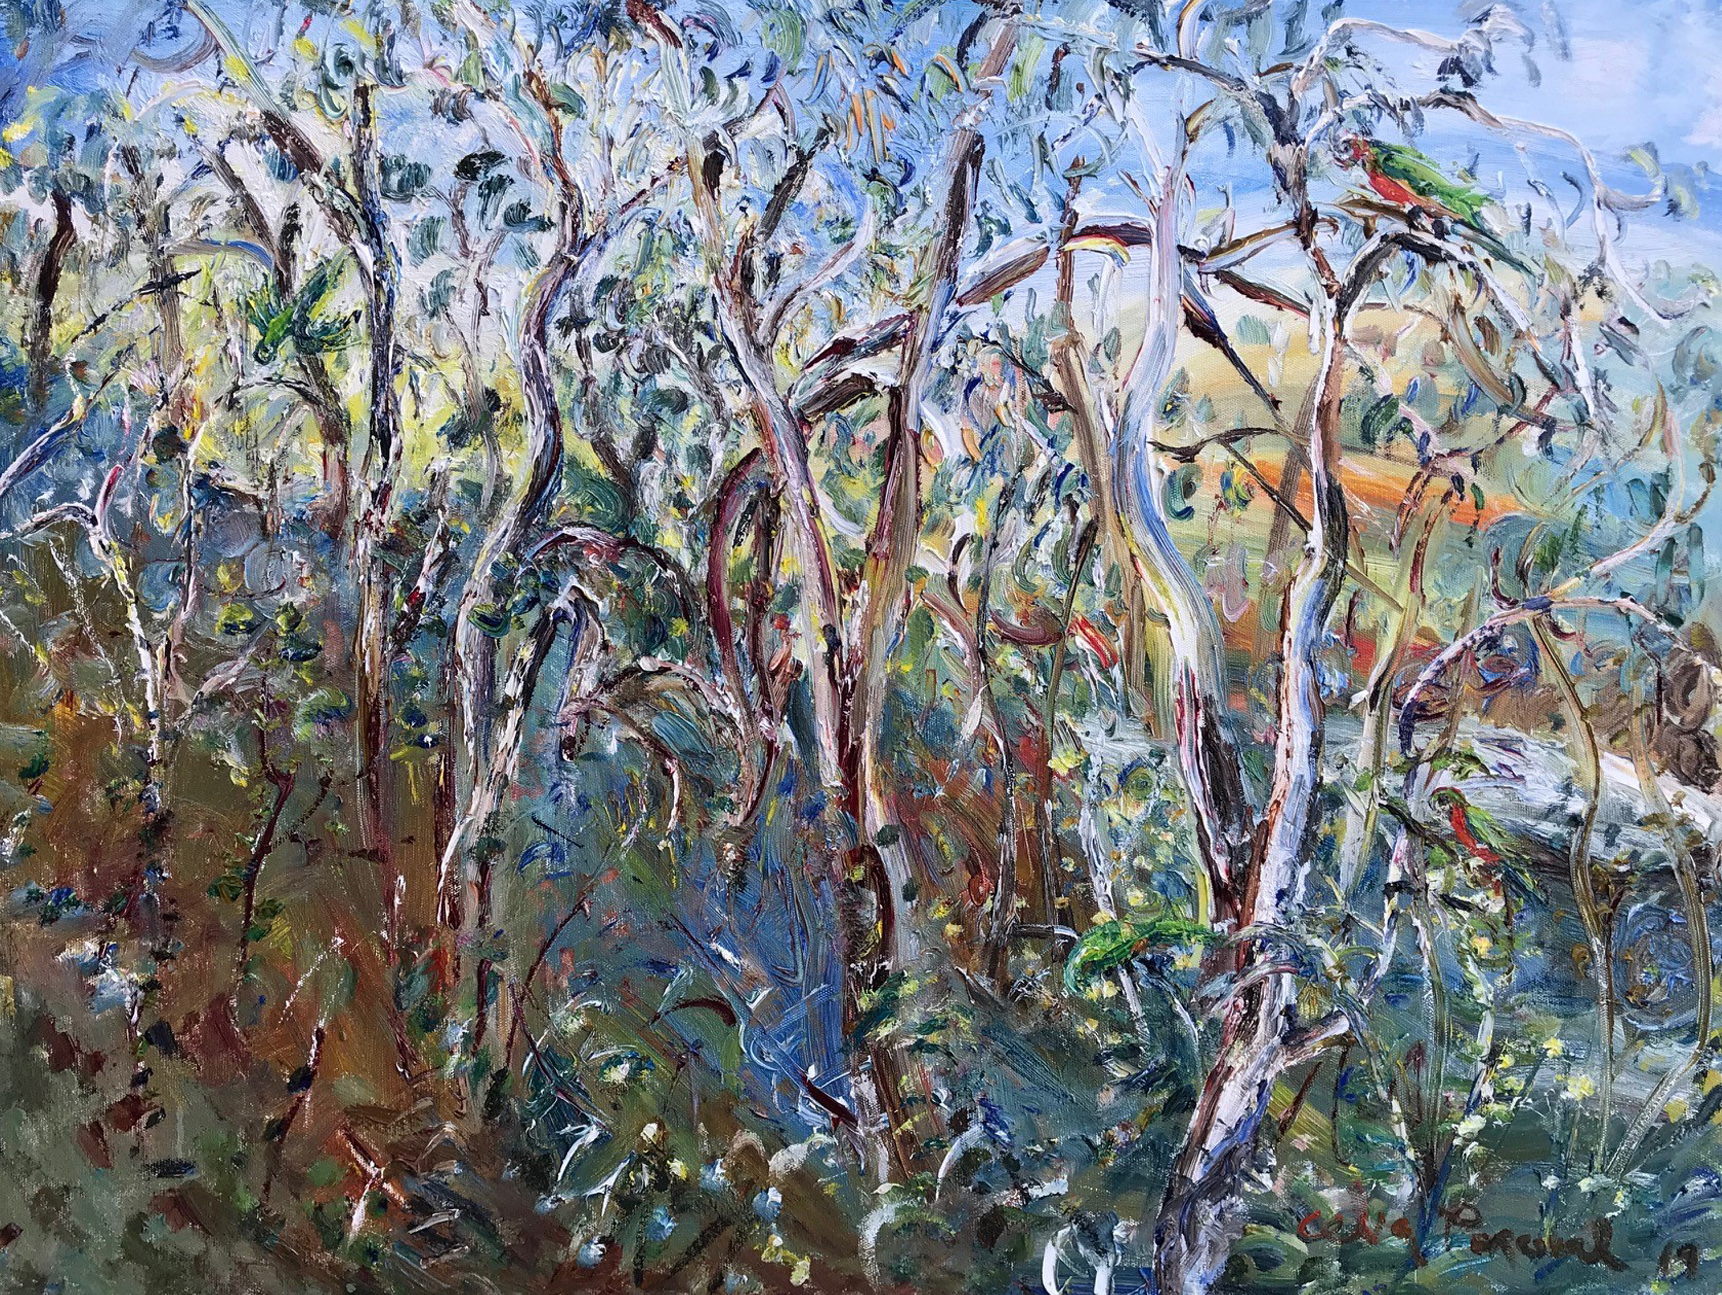 Celia Perceval 'Parrots in the Snow Gums, Evening Light Over the River' oil on canvas 102 x 76 cm $12,800